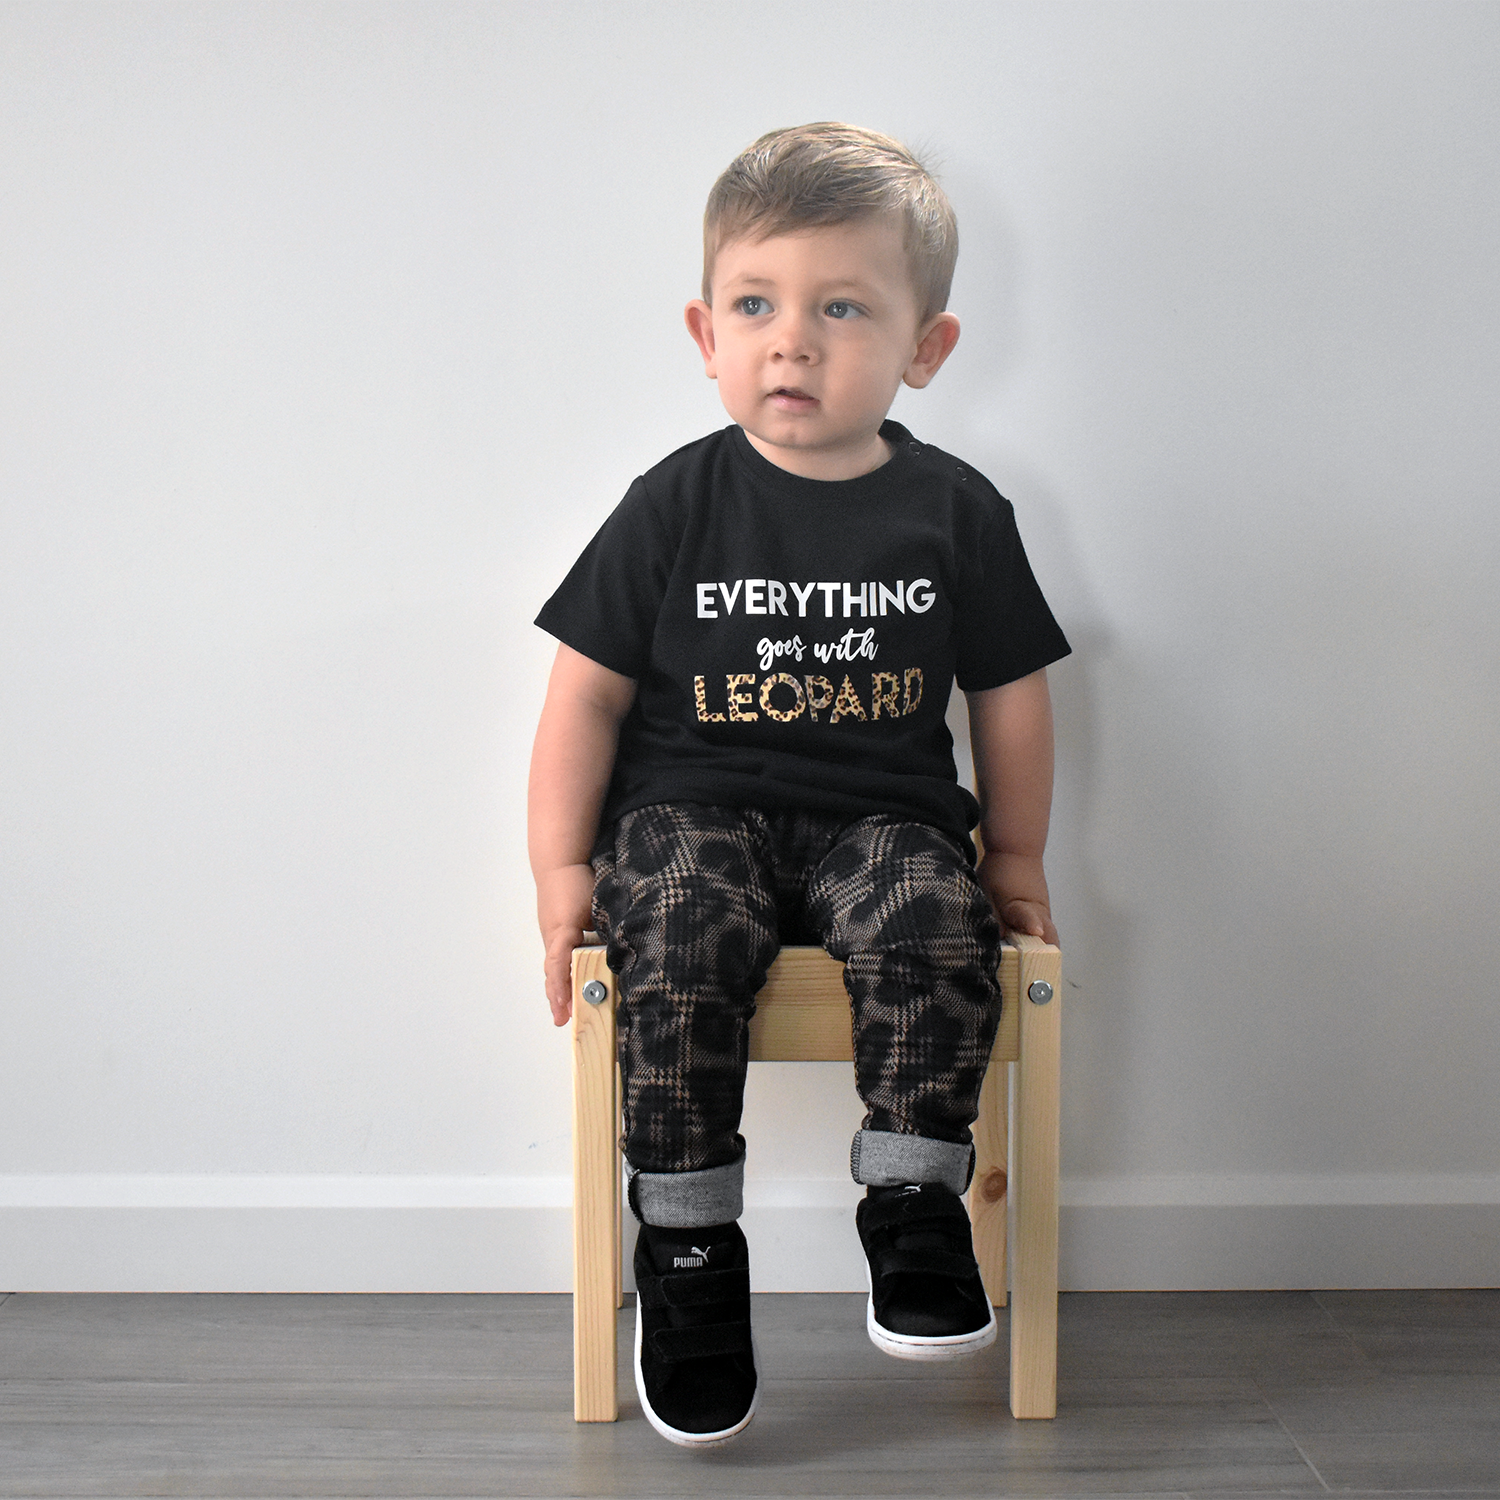 'Everything goes with leopard' baby shortsleeve shirt